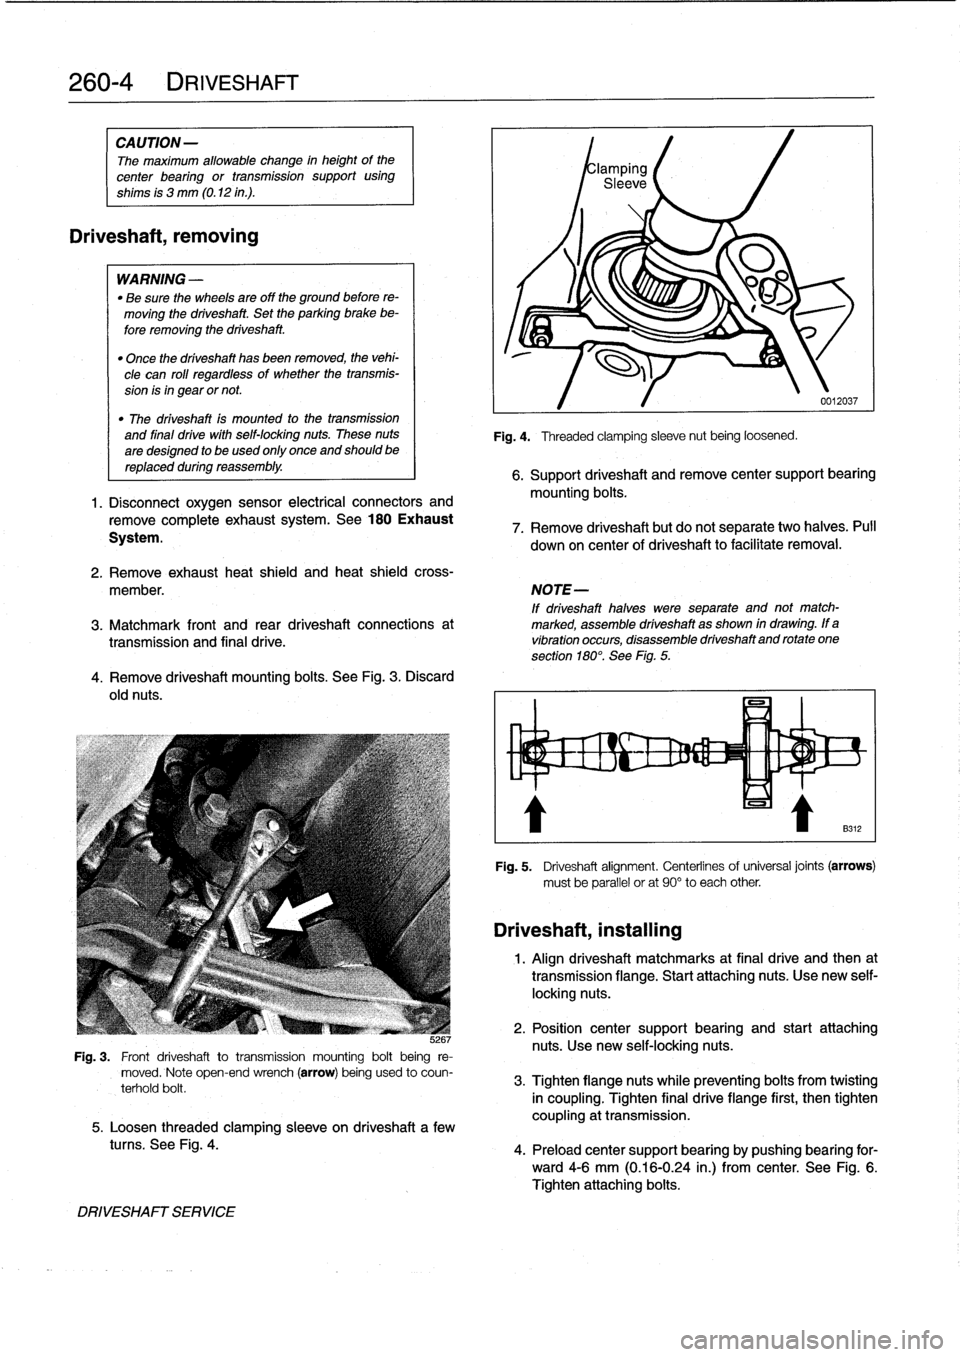 BMW 328i 1994 E36 Workshop Manual 
260-
4
DRIVESHAFT

CAUTION
-

The
maximum
allowable
change
in
height
of
the

center
bearing
or
transmission
support
using

shims
is
3
mm
(0
.12
in
.)
.

Driveshaft,
removing

WARNING
-

"
Be
sure
the